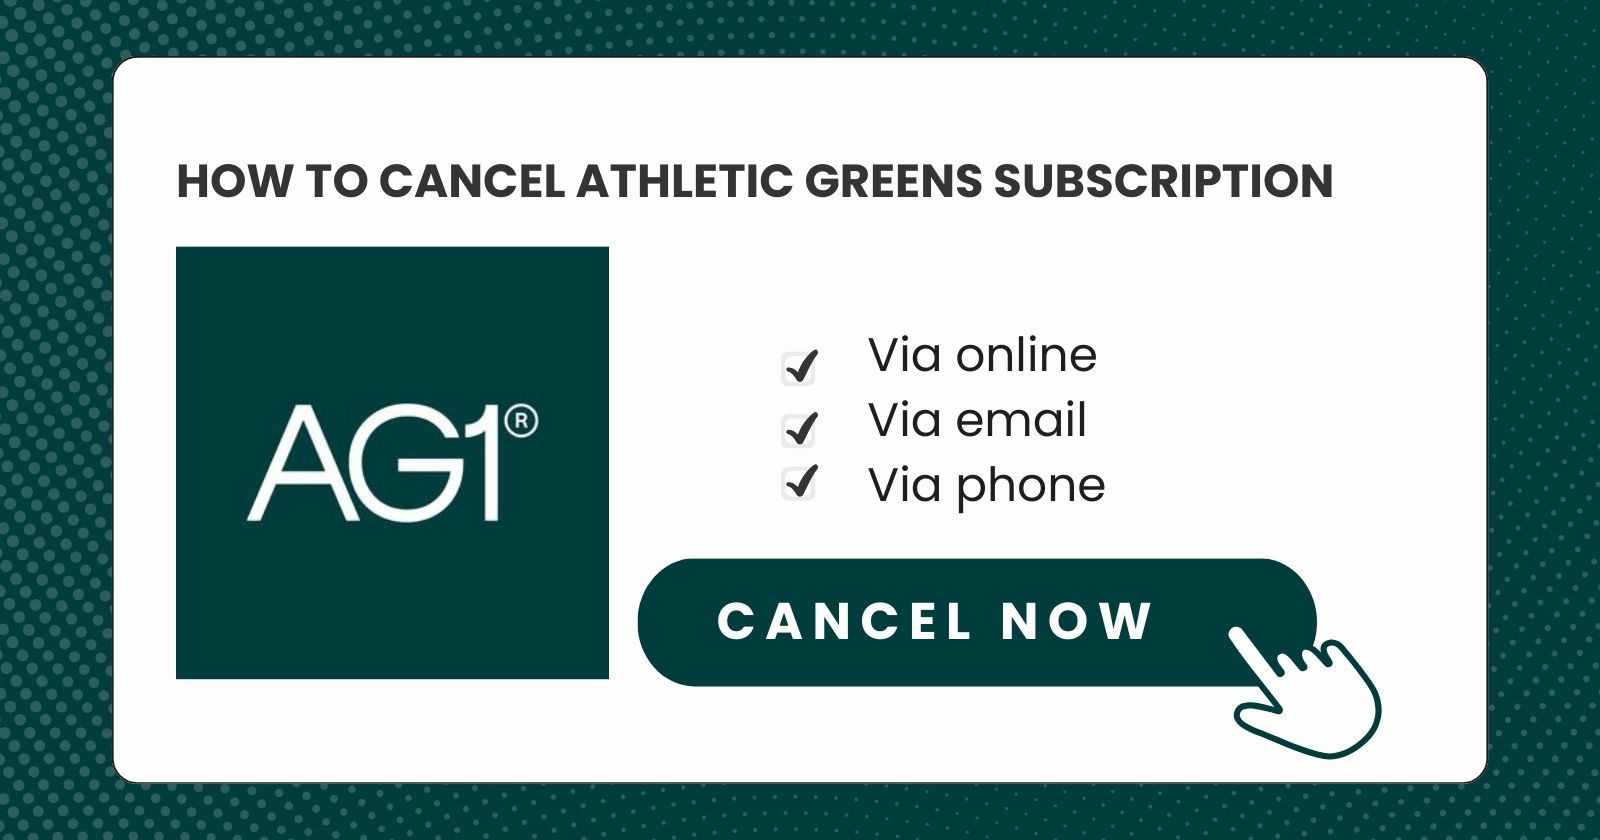 How To Cancel Athletic Greens Subscription Easily